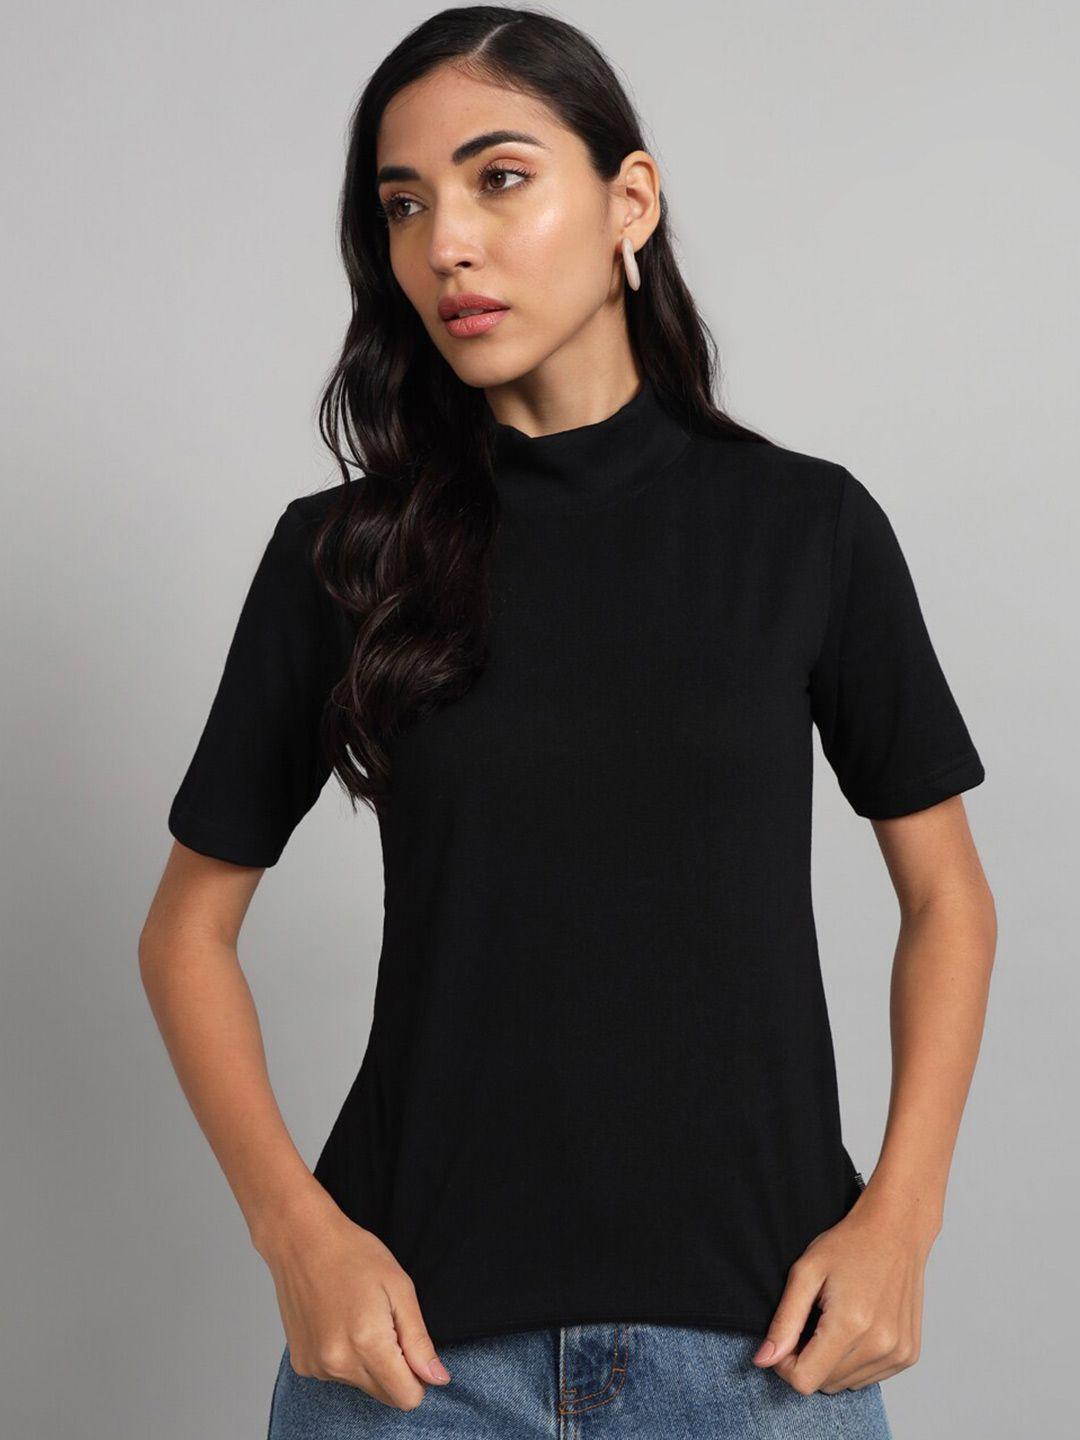 the dry state black high neck cotton t-shirt